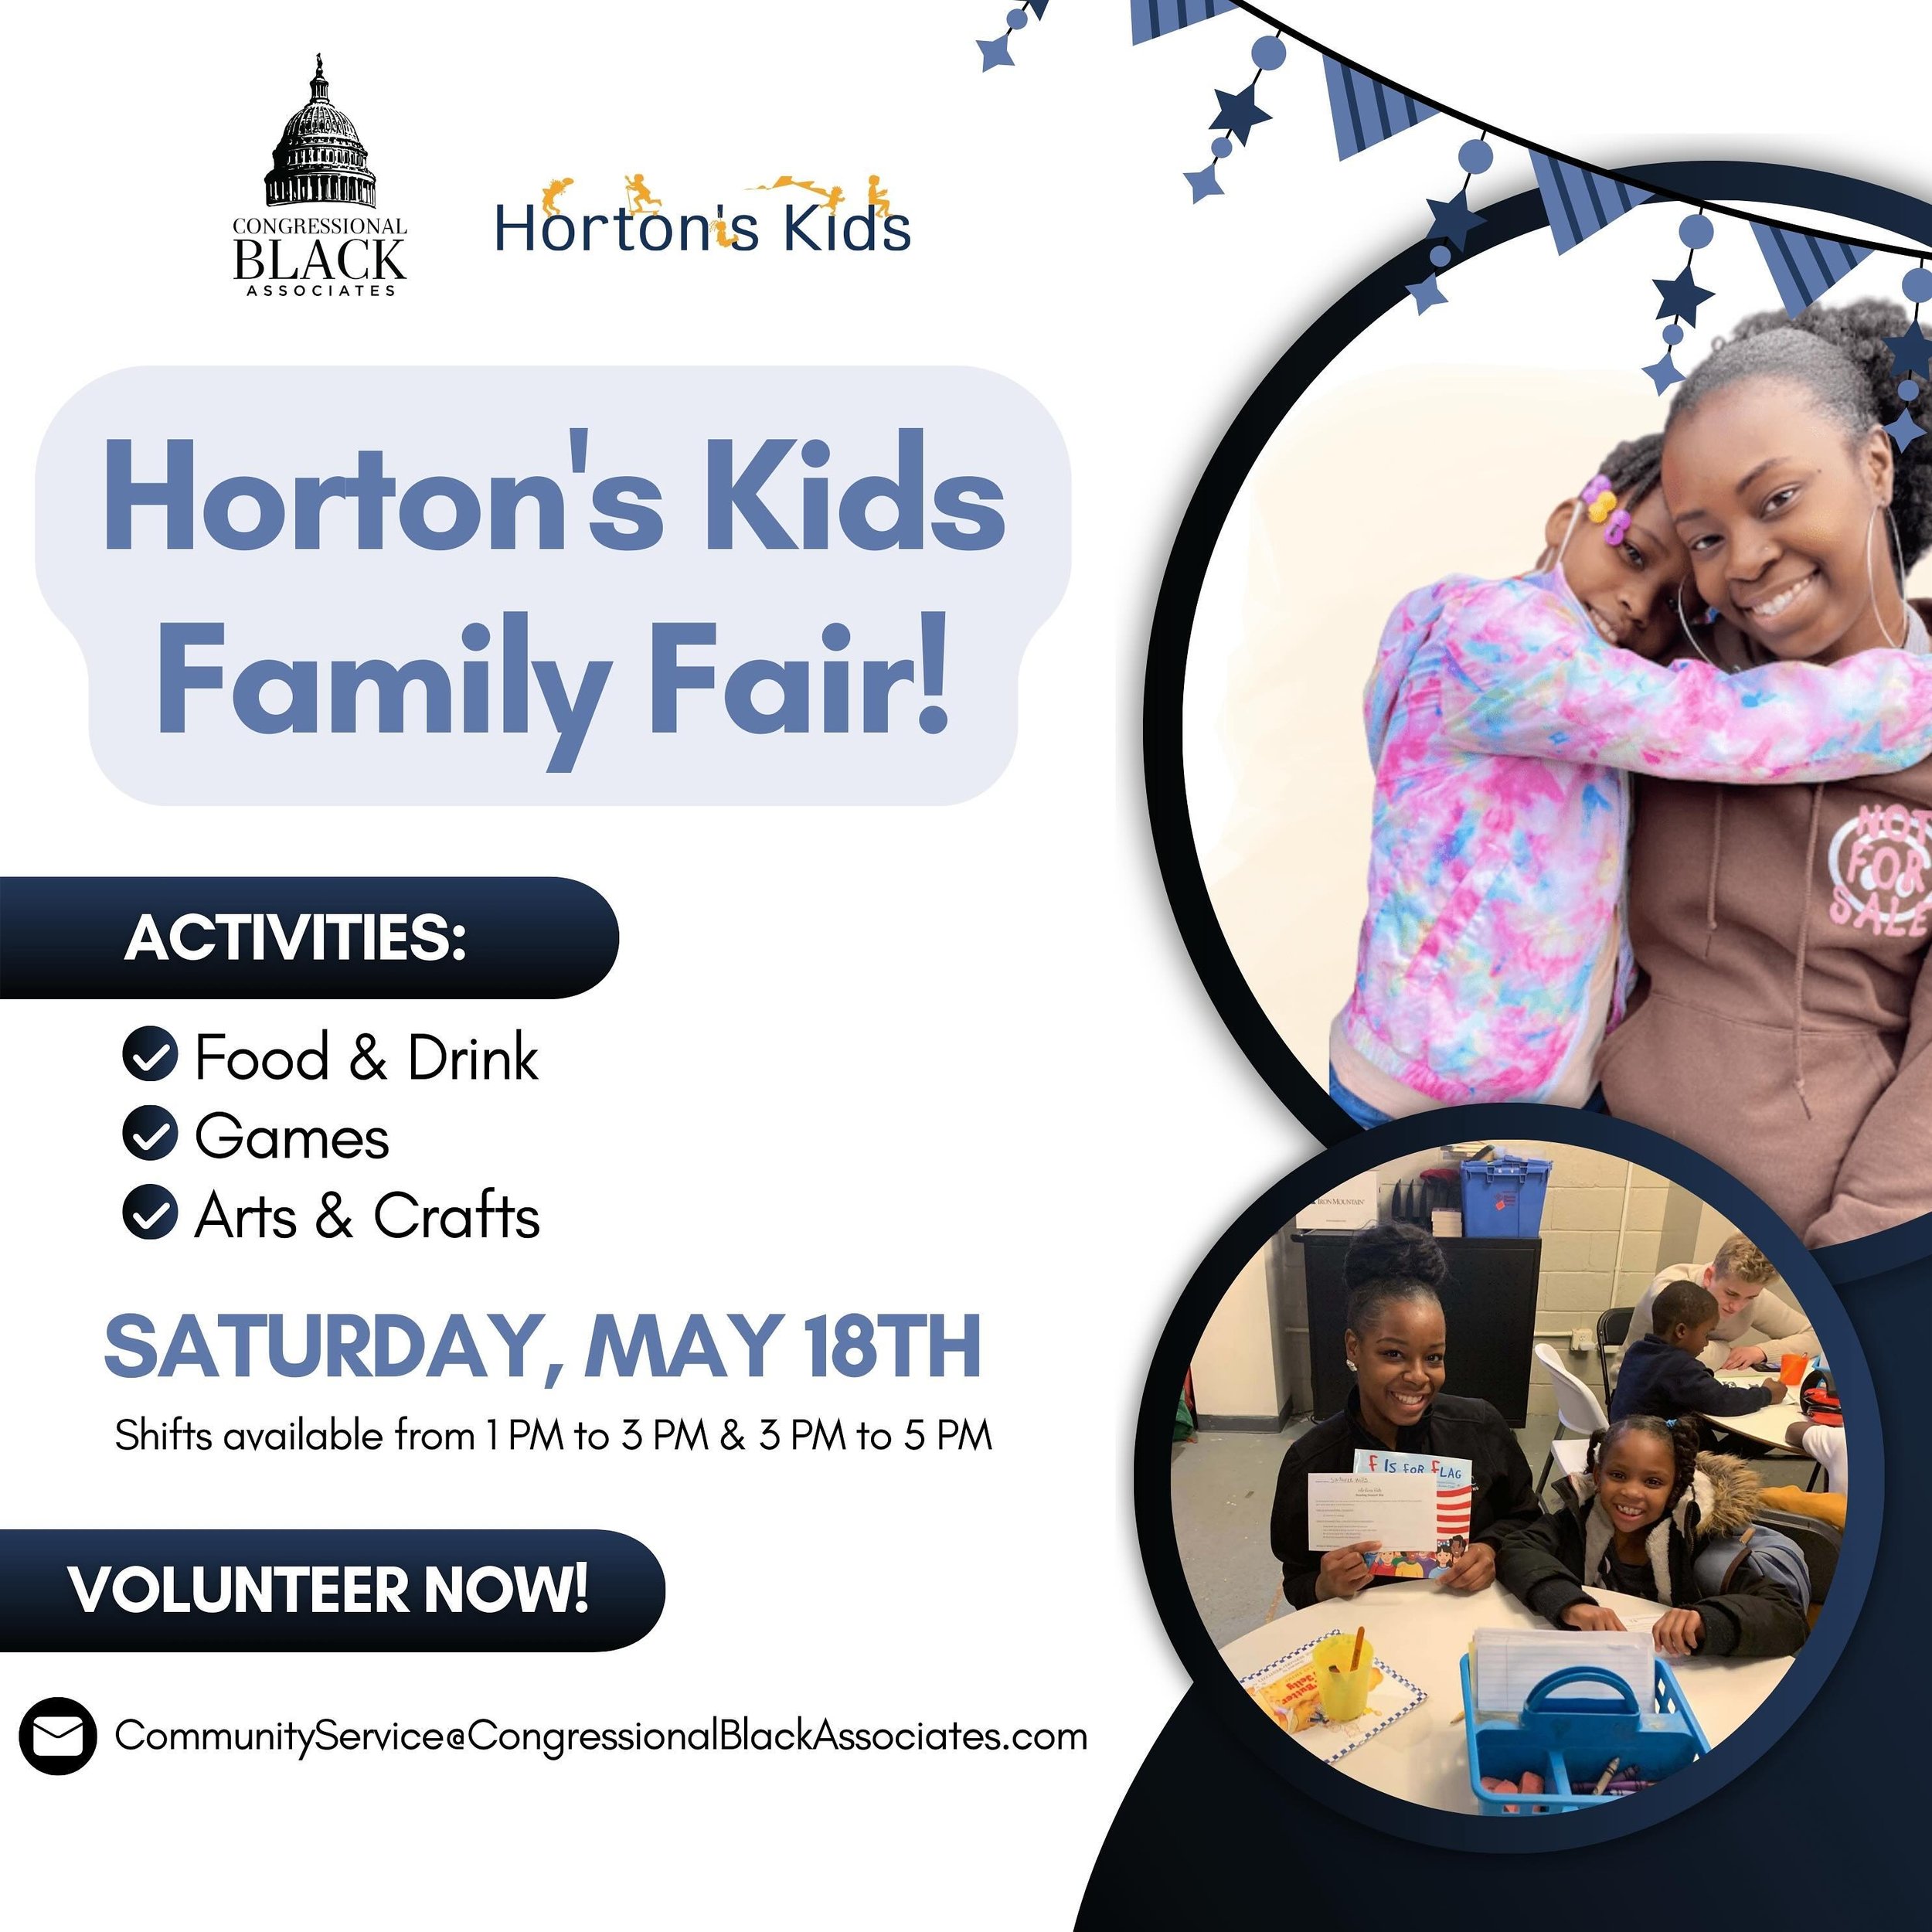 We are looking for volunteers to represent CBA at the 2nd annual @hortonskids Family Fair! 

Email Ruby at communityservice@congressionalblackassociates.com to sign up!